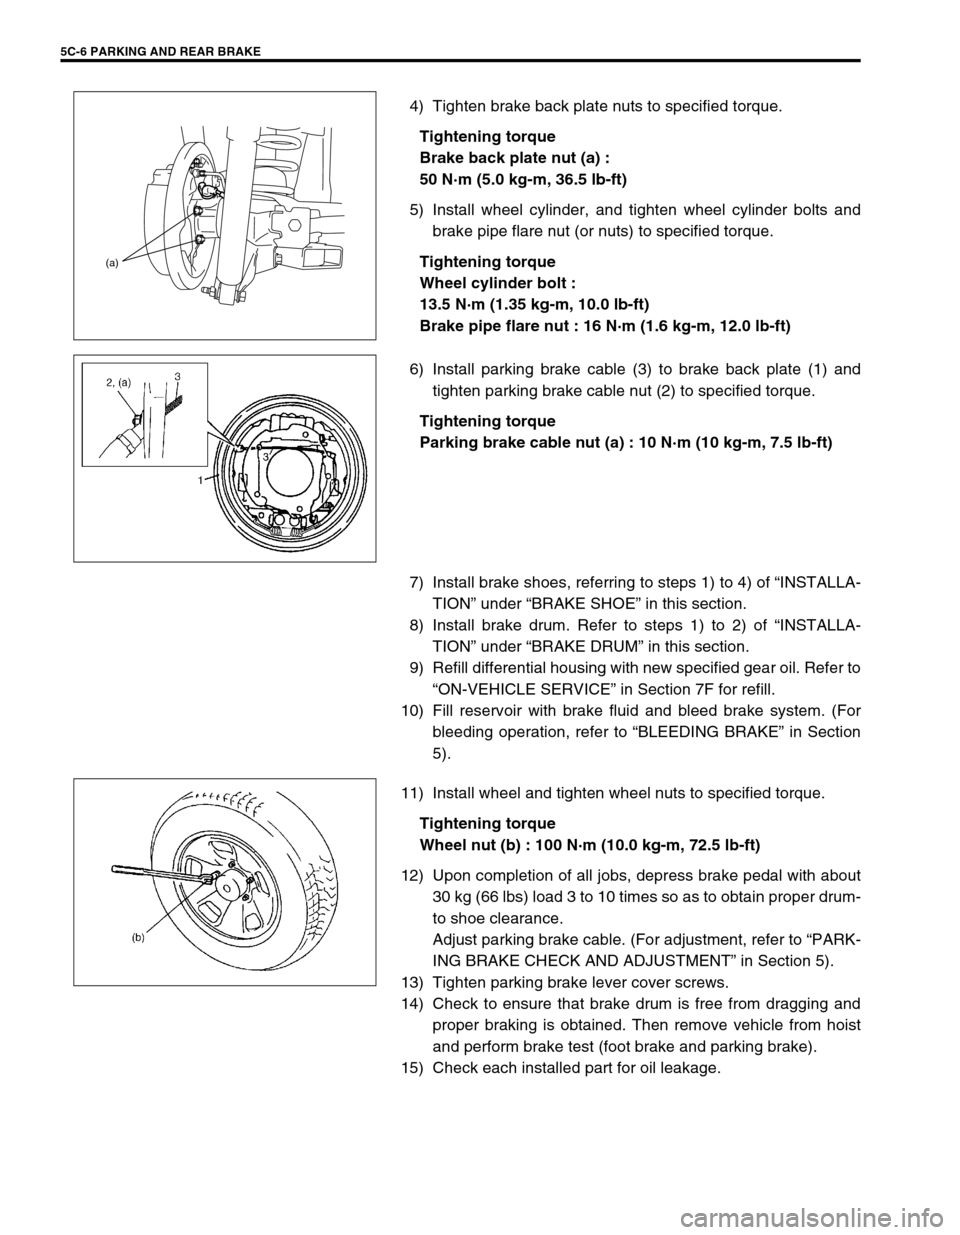 SUZUKI GRAND VITARA 2001 2.G Owners Manual 5C-6 PARKING AND REAR BRAKE
4) Tighten brake back plate nuts to specified torque.
Tightening torque
Brake back plate nut (a) :
50 N·m (5.0 kg-m, 36.5 lb-ft)
5) Install wheel cylinder, and tighten whe